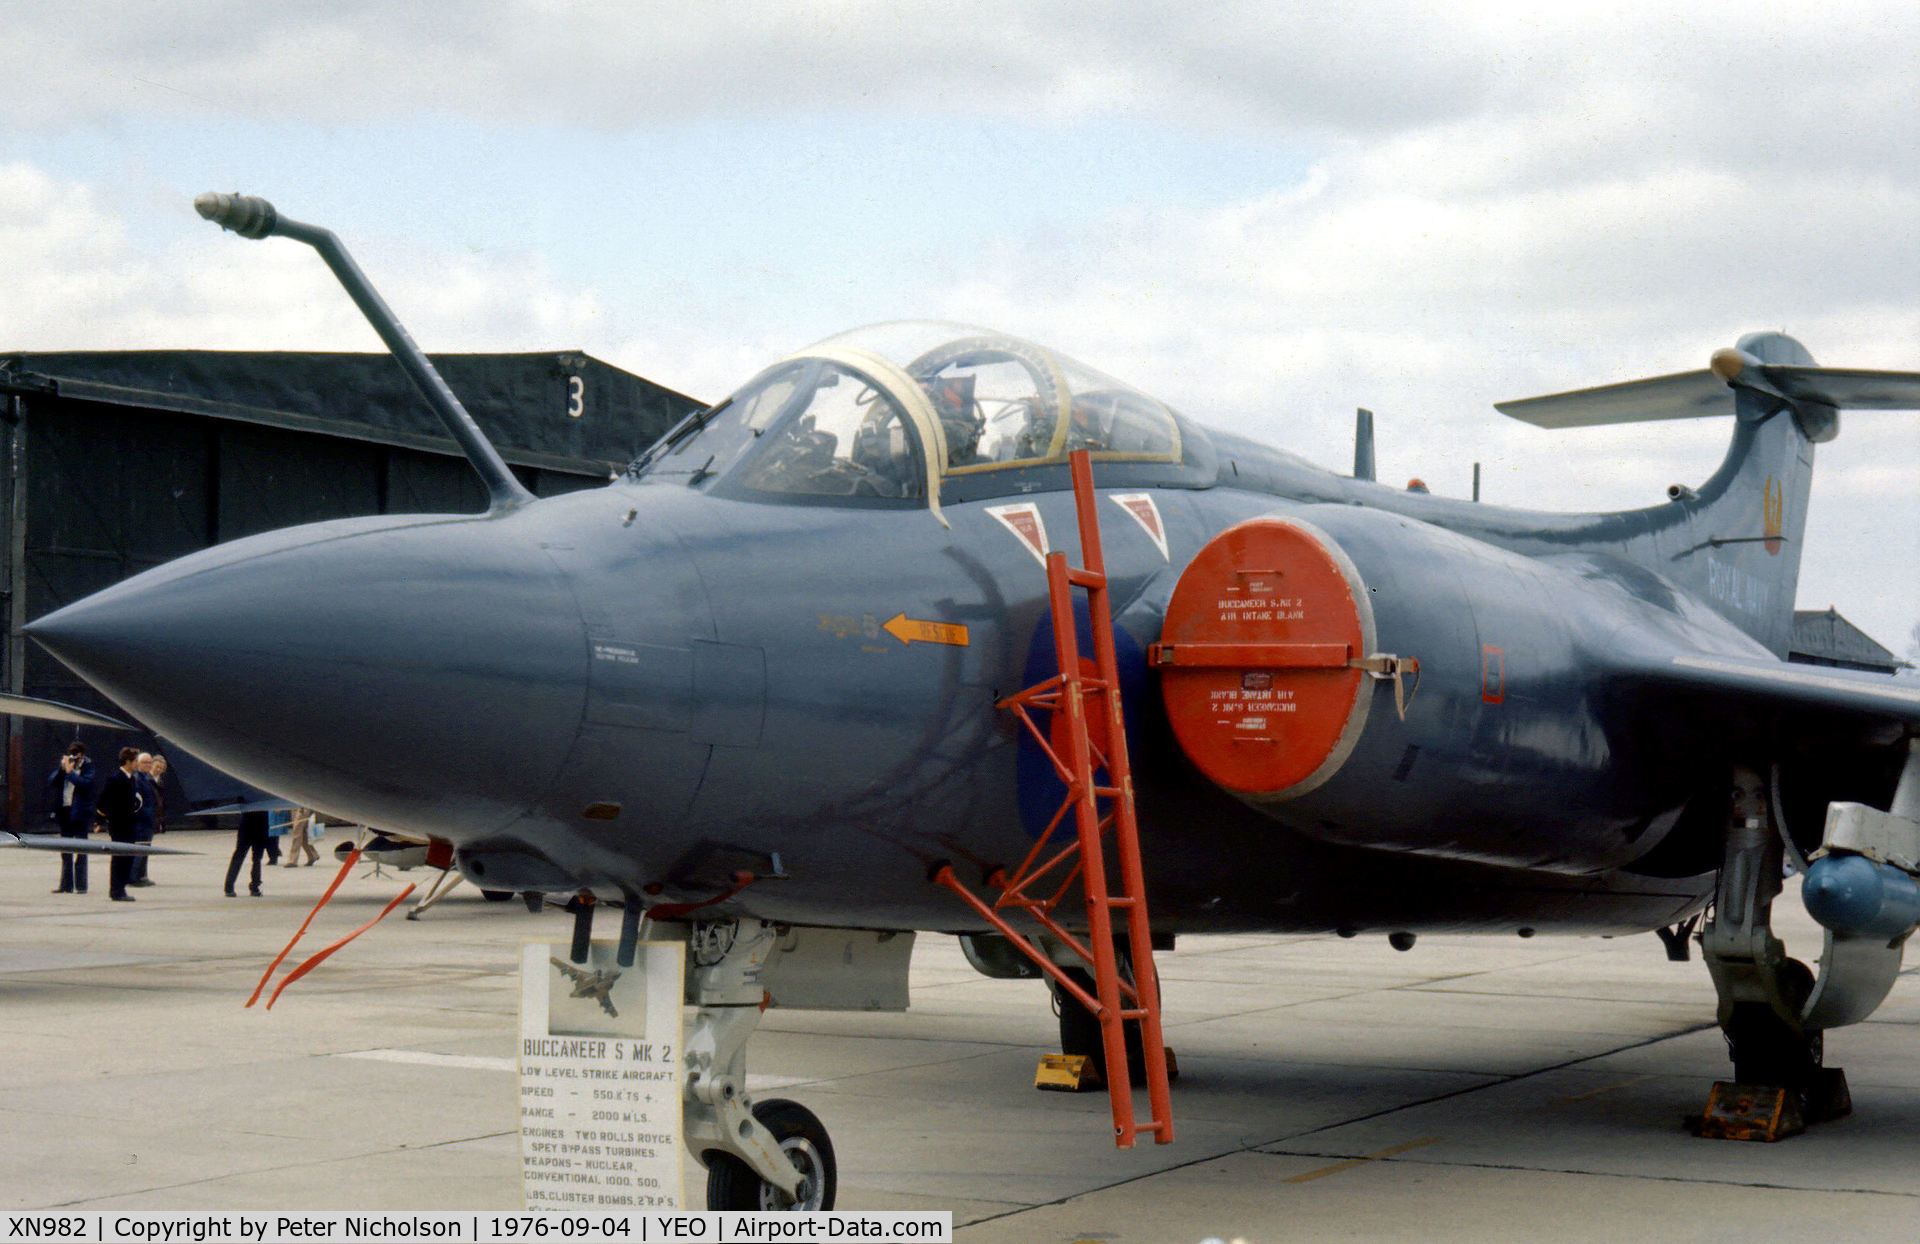 XN982, 1965 Hawker Siddeley Buccaneer S.2A C/N B3-09-63, Another view of this Buccaneer S.2A of 809 Squadron on display at the 1976 RNAS Yeovilton Airshow.